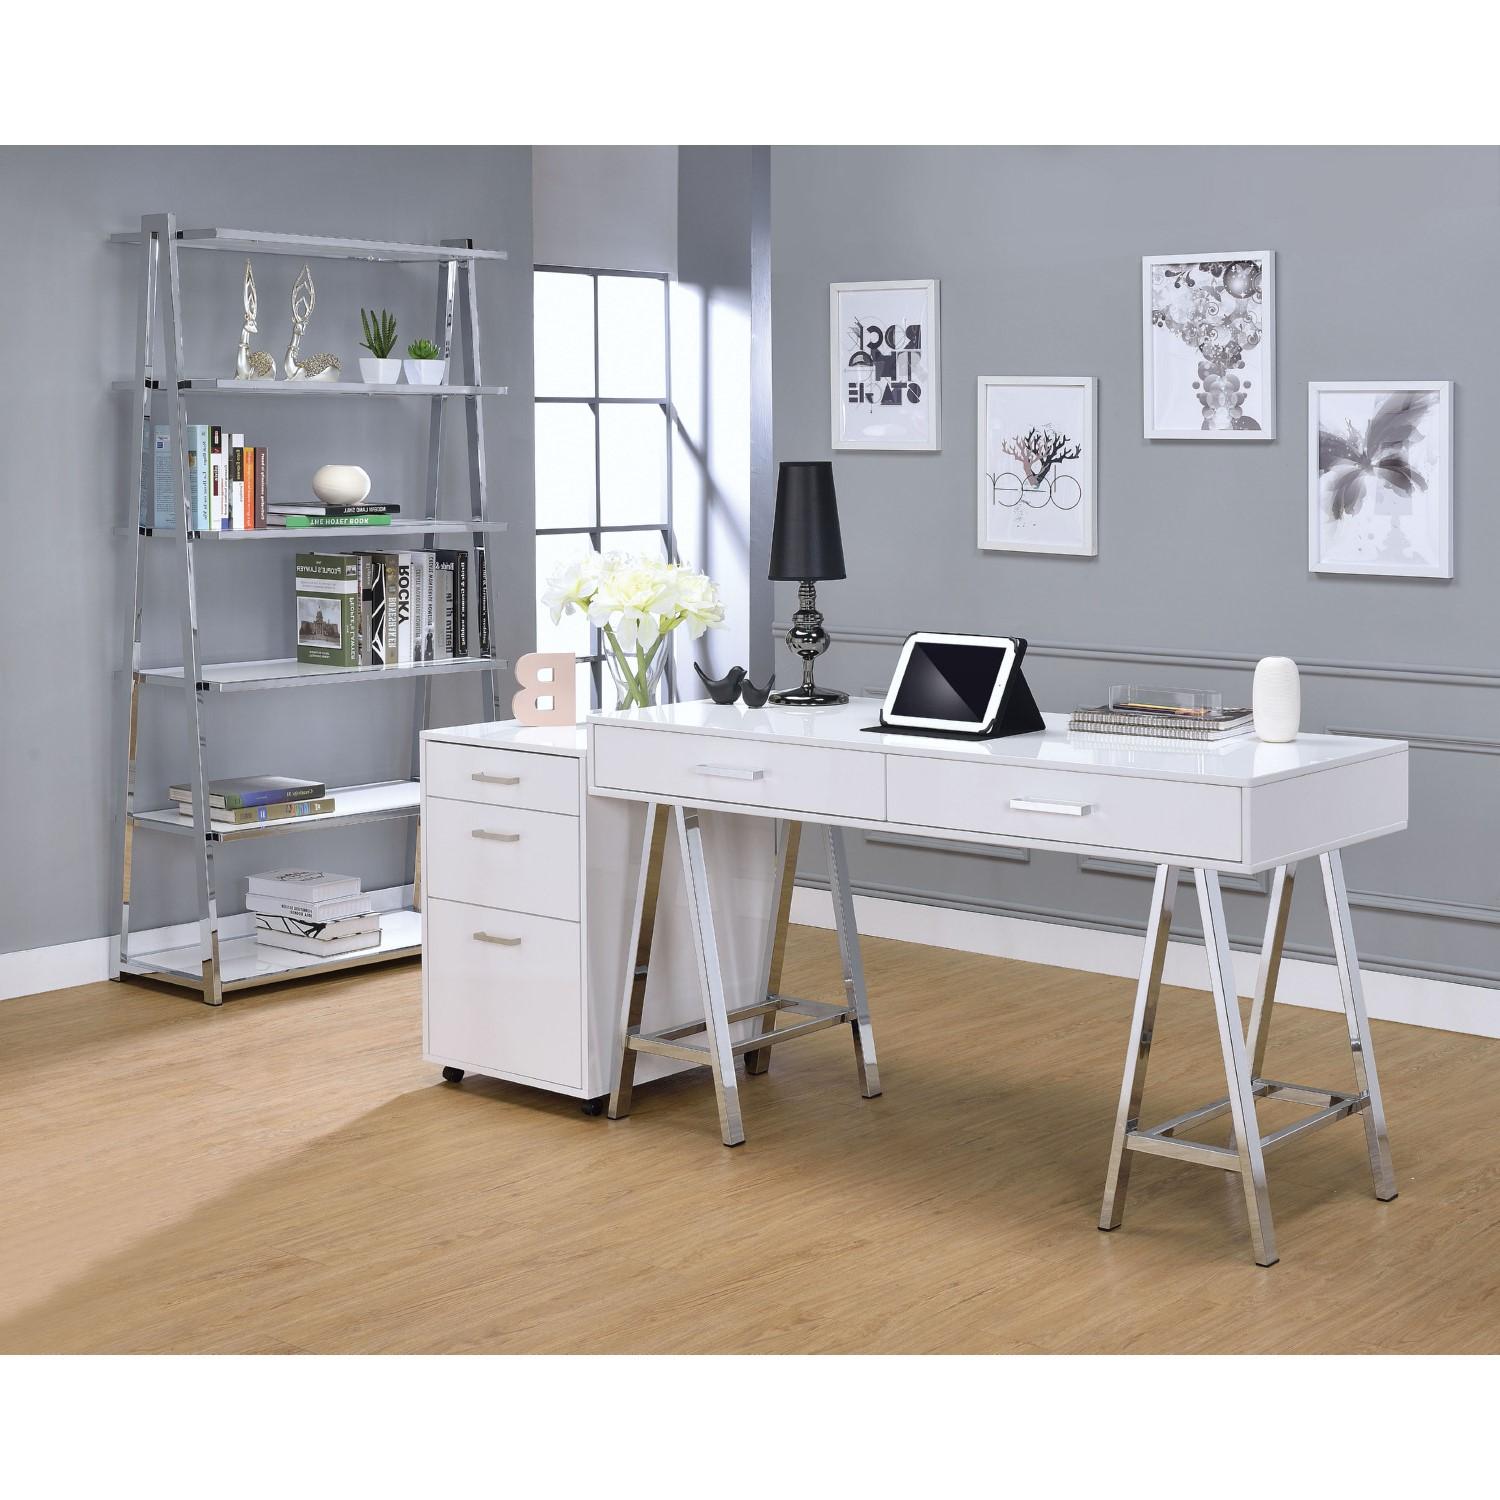 Contemporary, Modern Home Office Set 92229 Coleen 92229-3pcs in White 